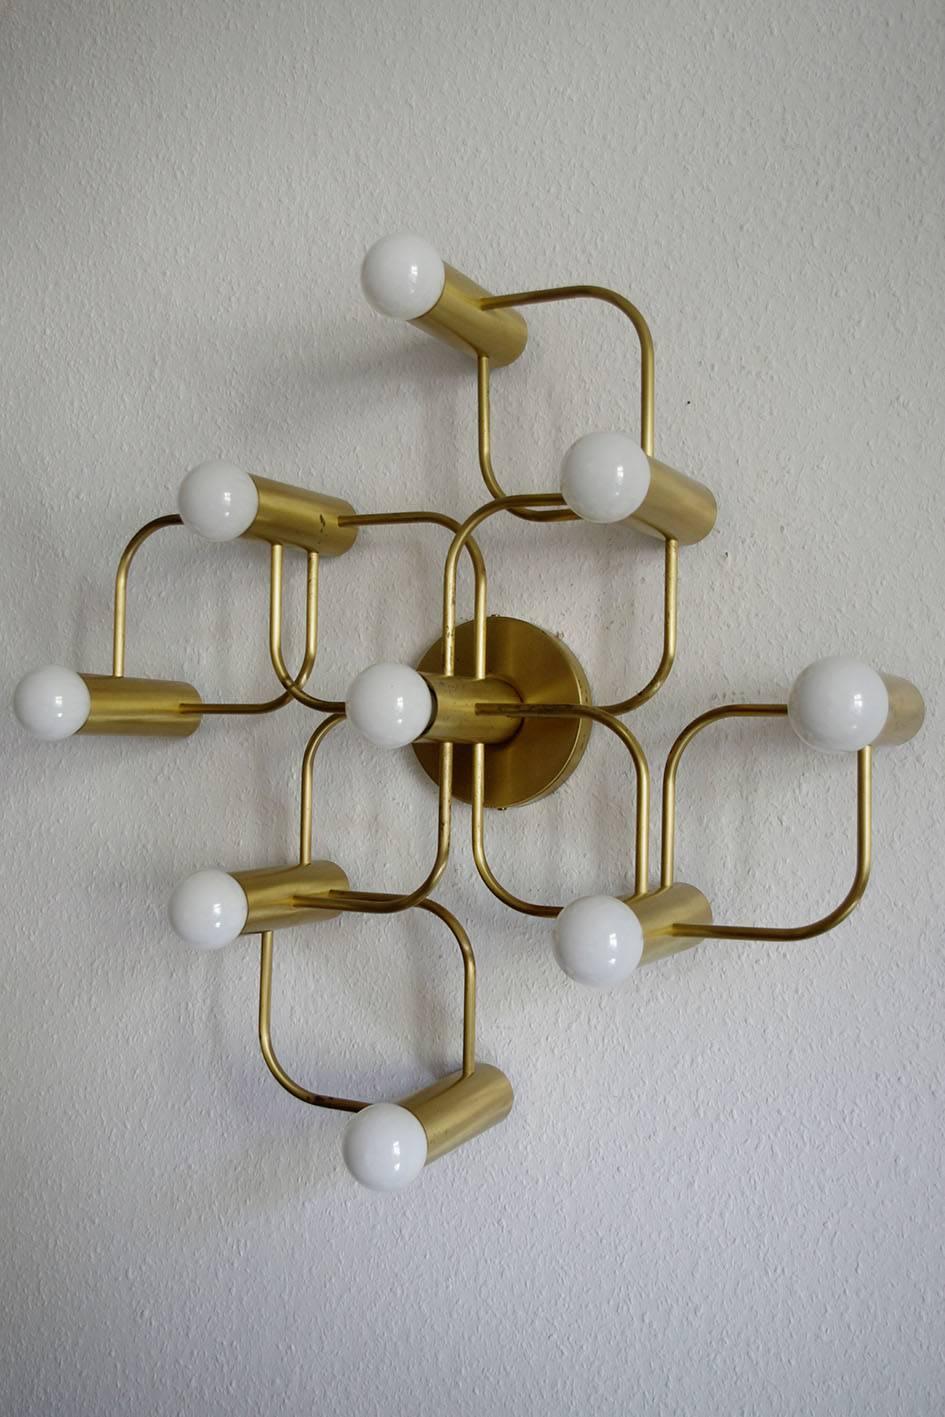 Sculptural Sciolari style ceiling or wall flush mount by Leola.
Brushed brass (gold) version.
Germany, 1960s.
  